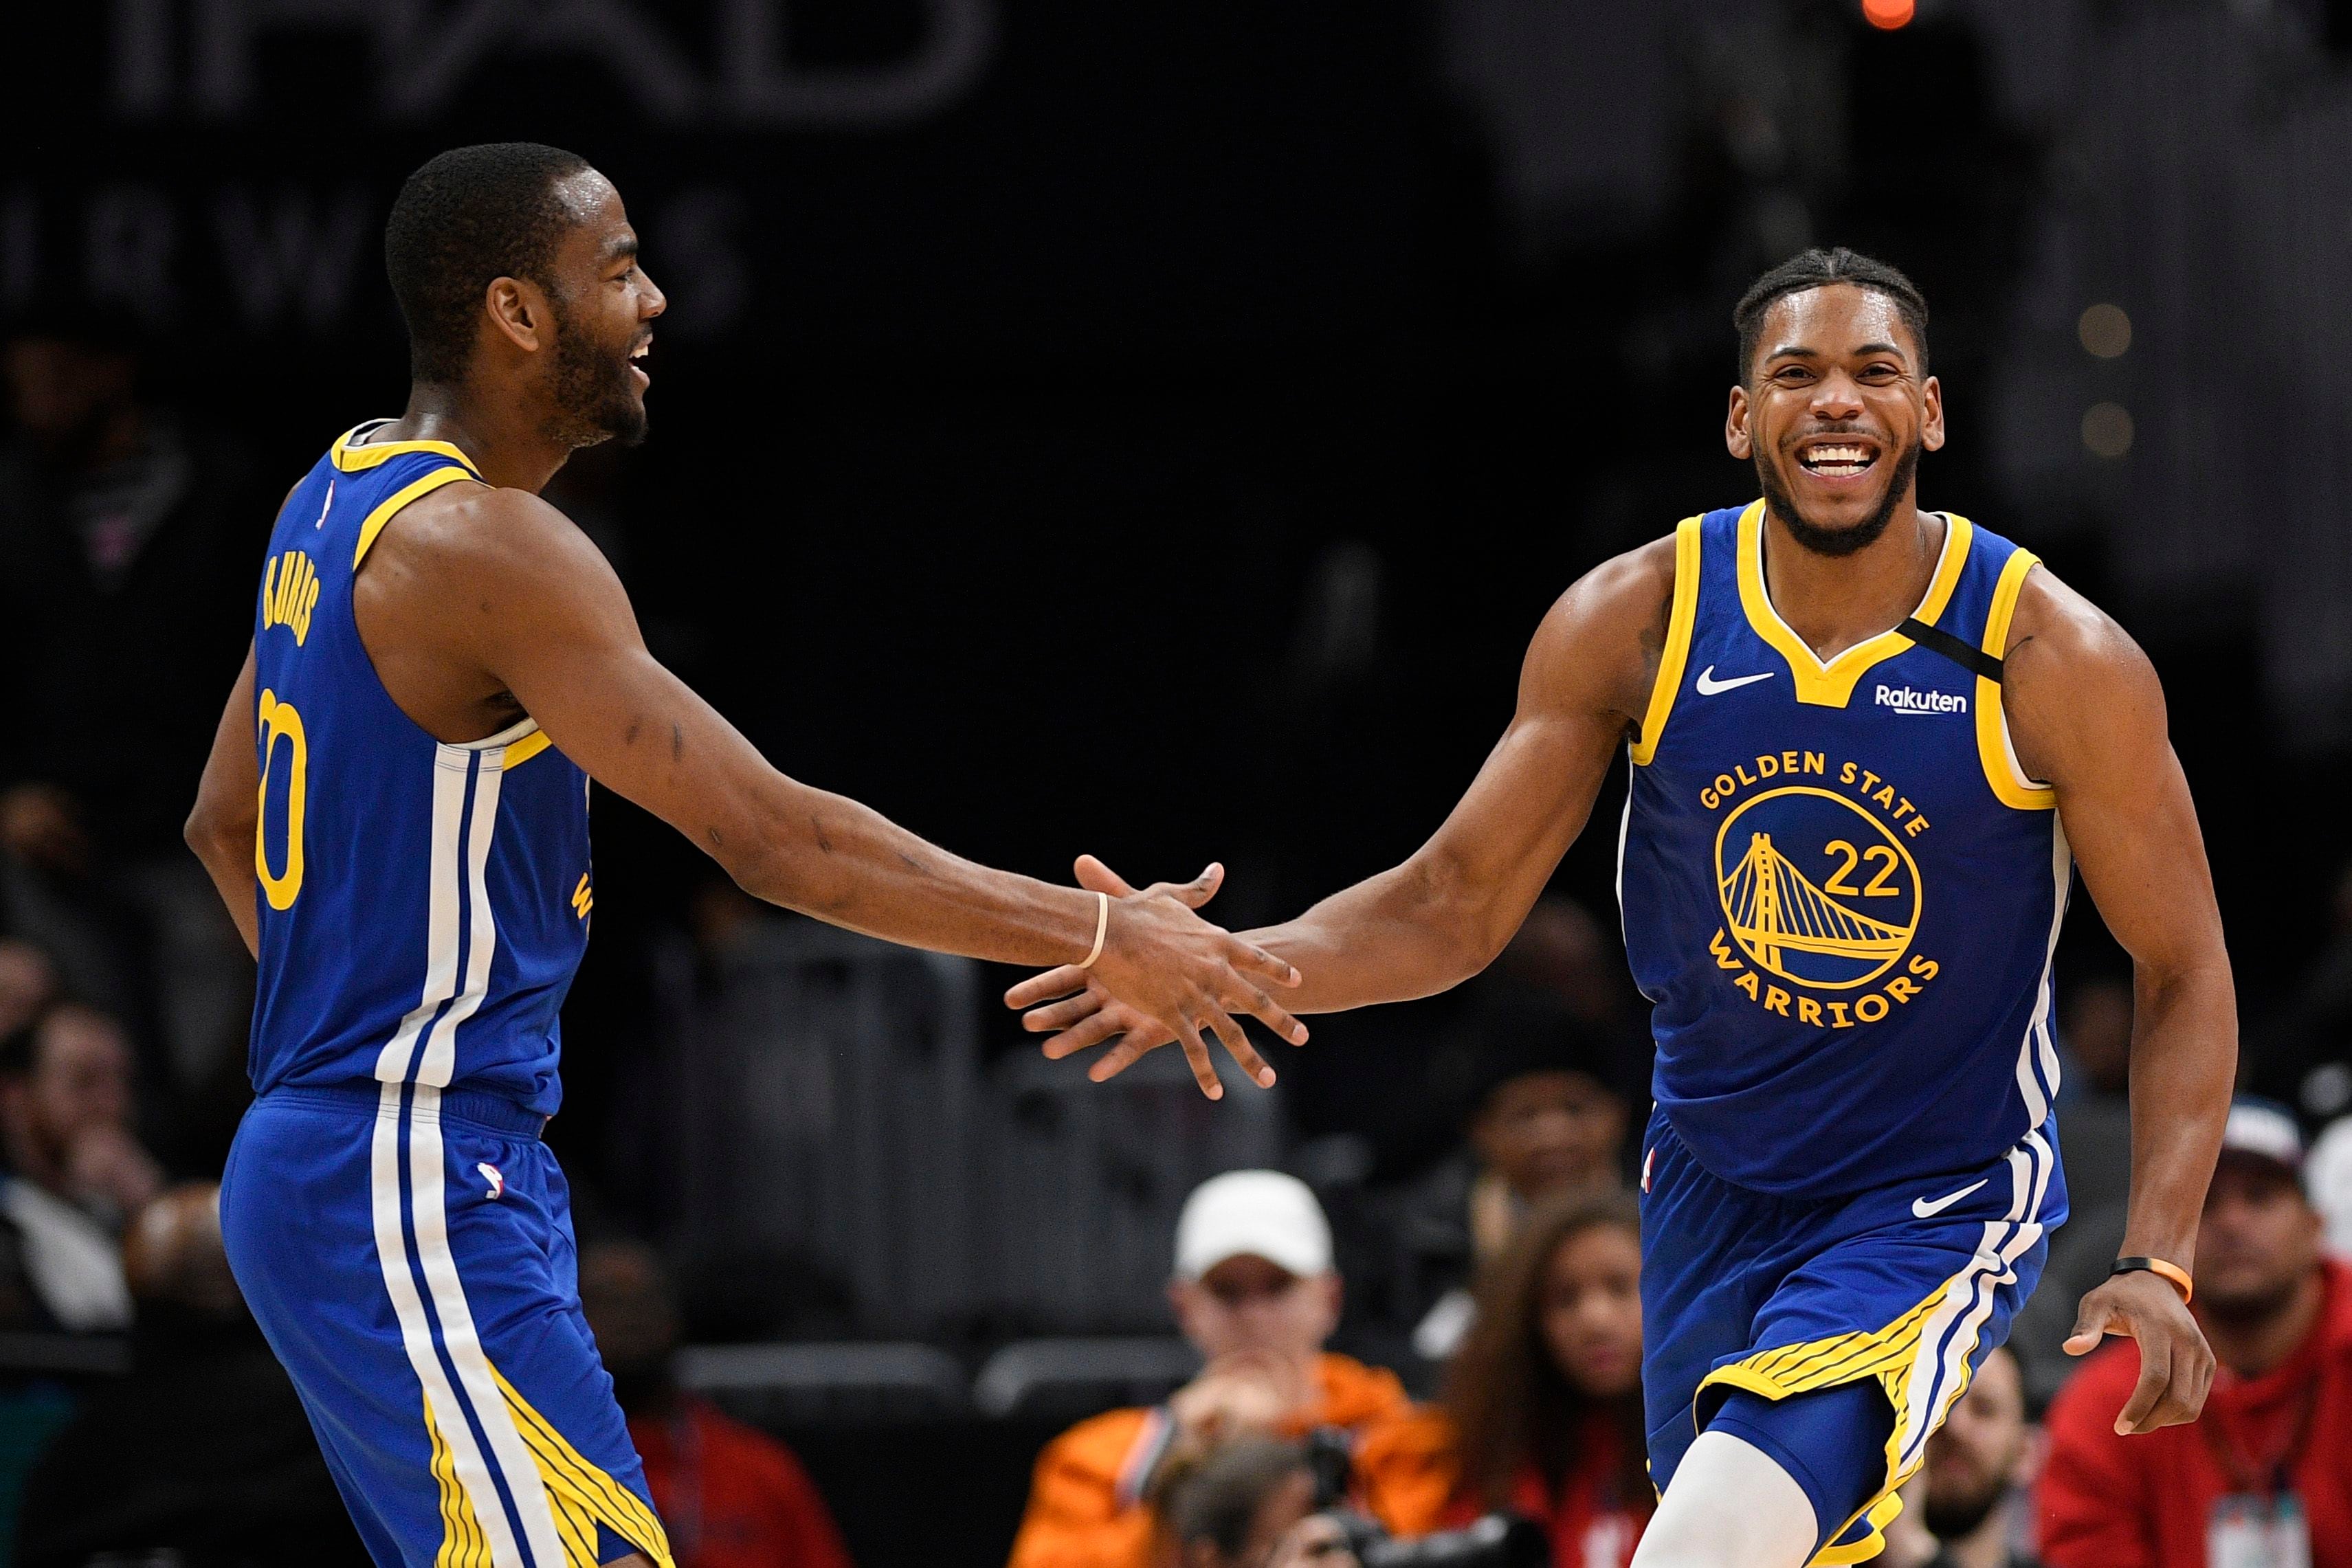 Nba Trade Deadline Sixers Trade For Alec Burks Glenn Robinson Iii From Golden State Warriors